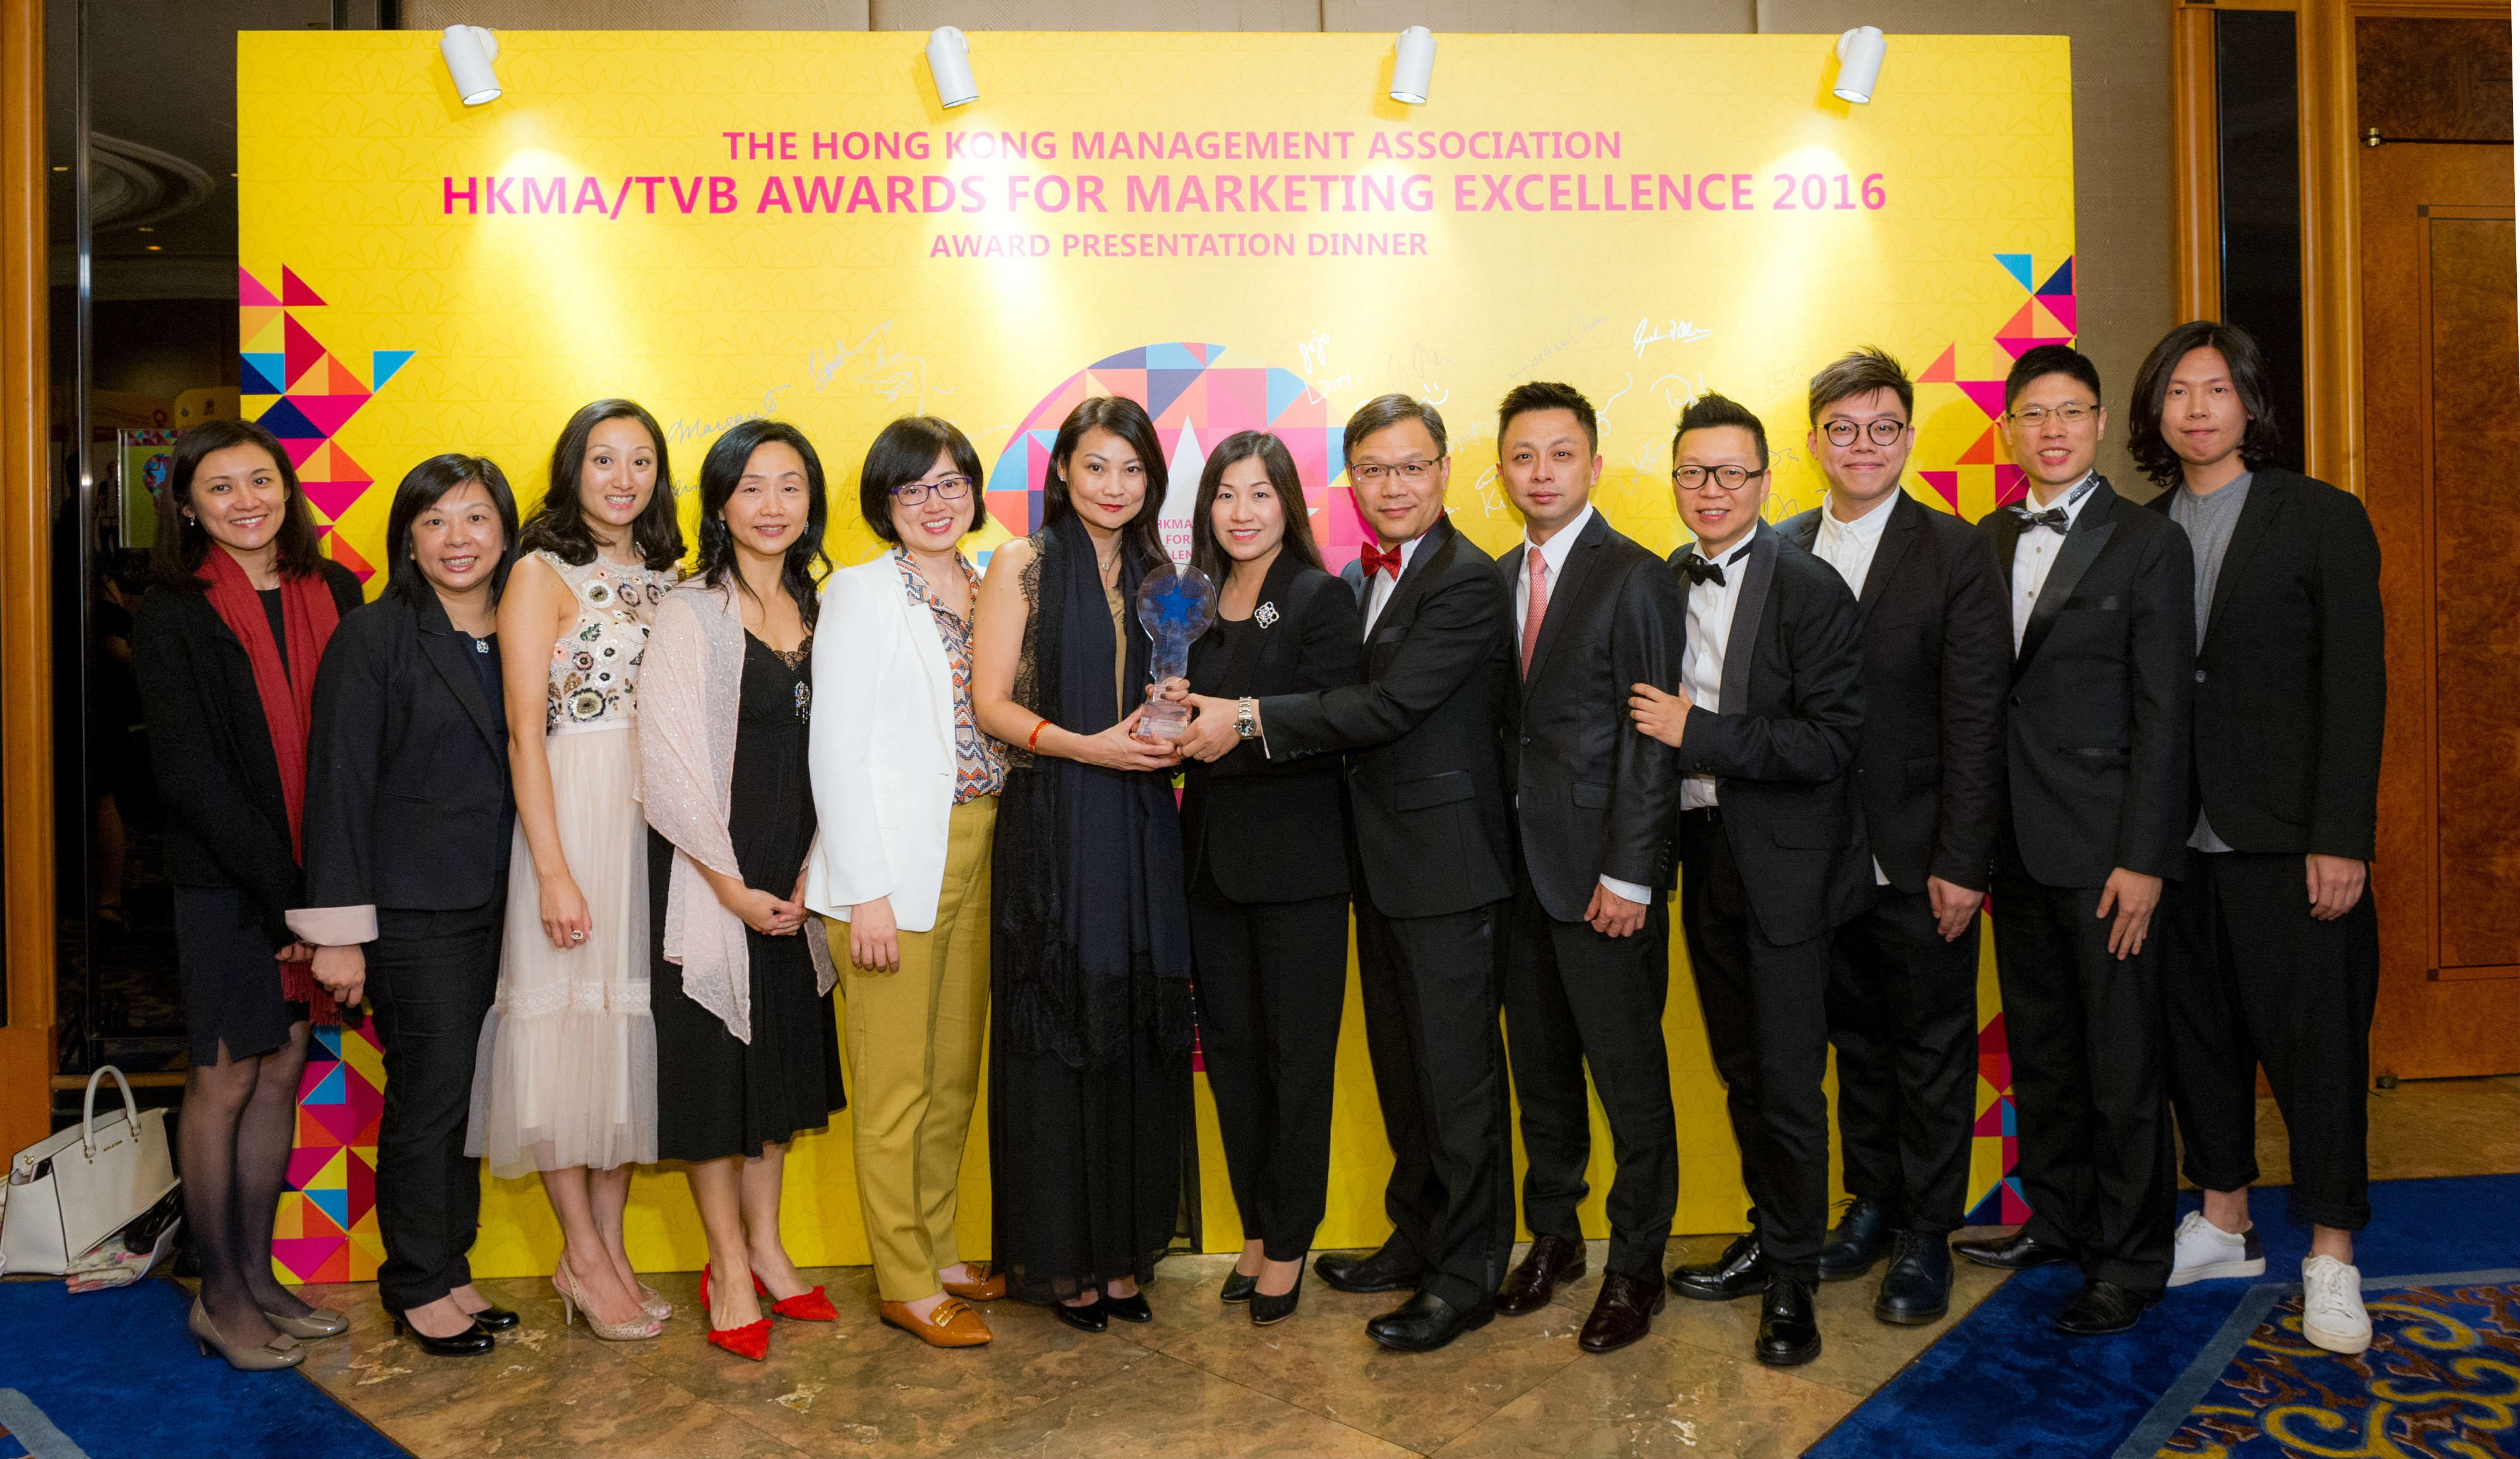 Ms. Bonnie Tse, General Manager, Business Strategy and Marketing of AIA Hong Kong & Macau (centre) and the AIA team received the “Excellence Award” at the “HKMA/TVB Awards for Marketing Excellence”.